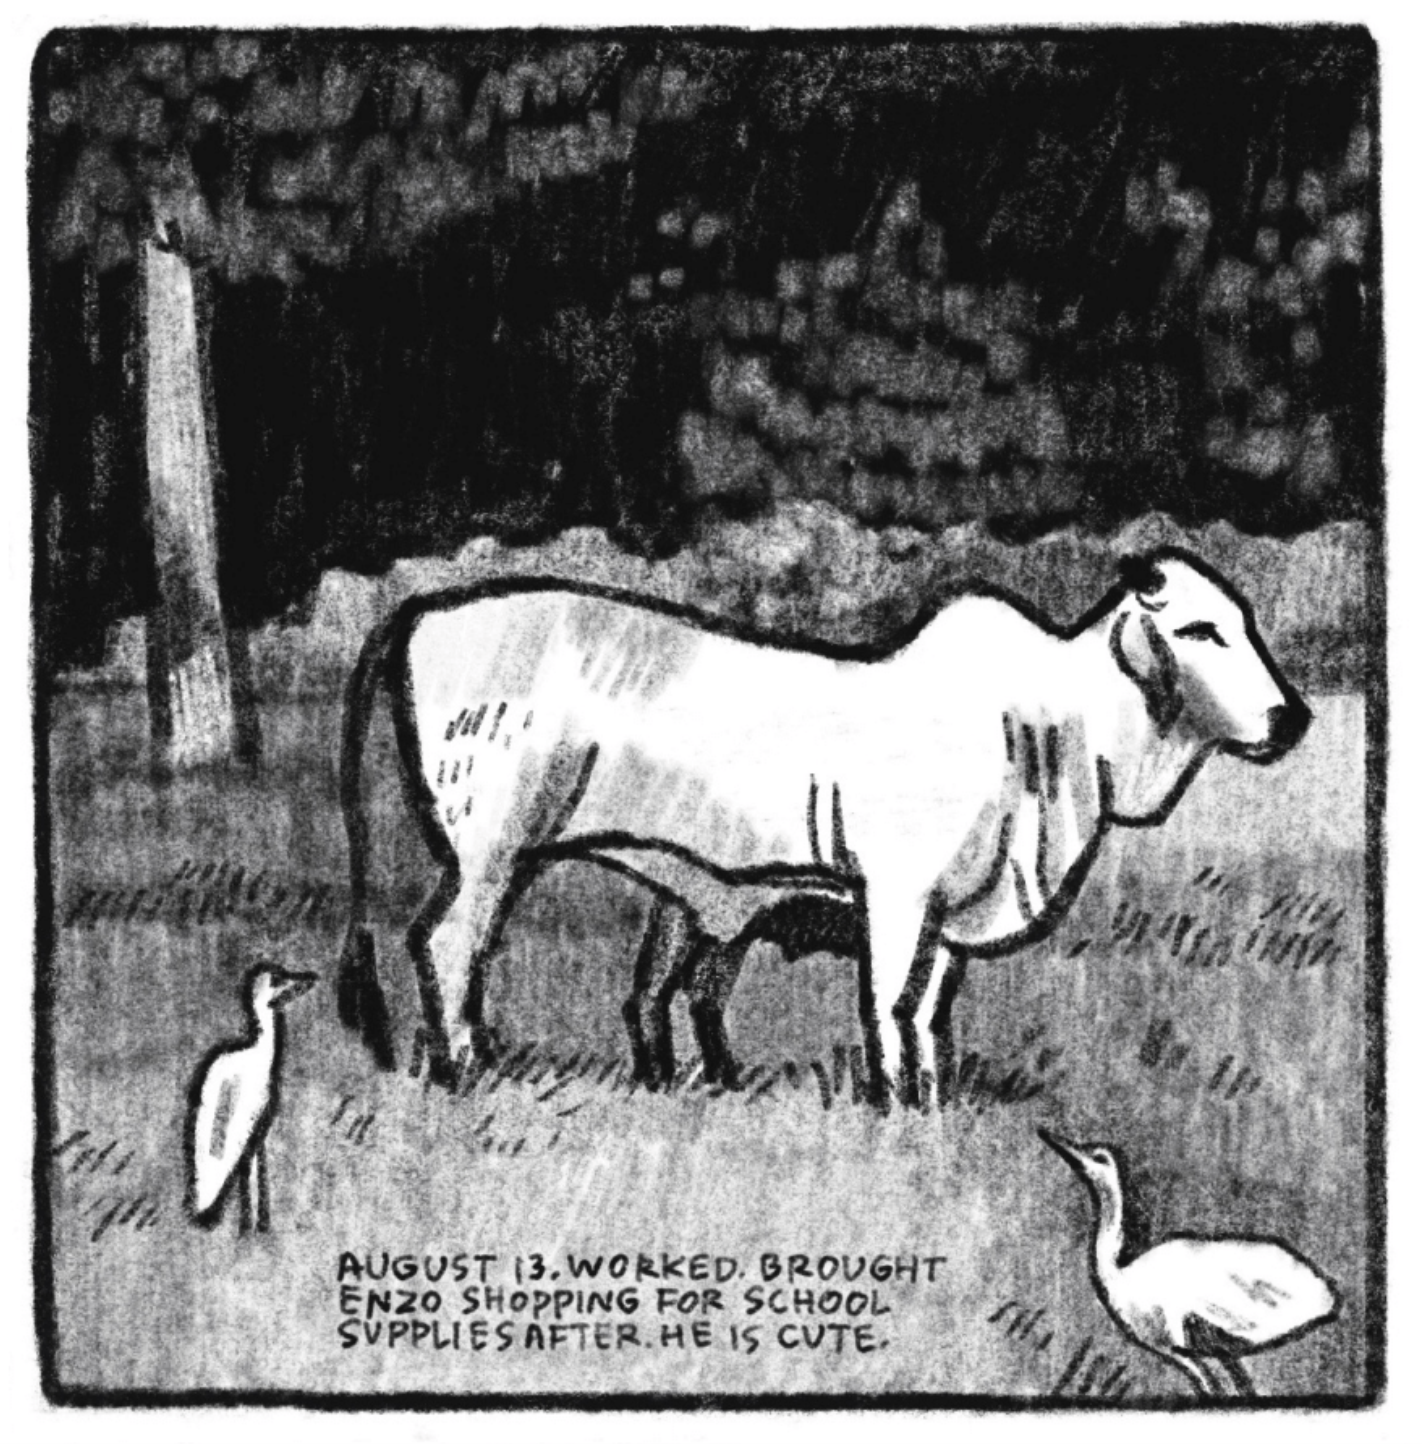 3. A Brahman cow, with its signature hump, stands in a field, facing the right of the panel. There are two cattle egrets standing to the cowâ€™s right, in the foreground. â€œAugust 13. Worked. Brought Enzo shopping for school supplies after. He is cute.â€